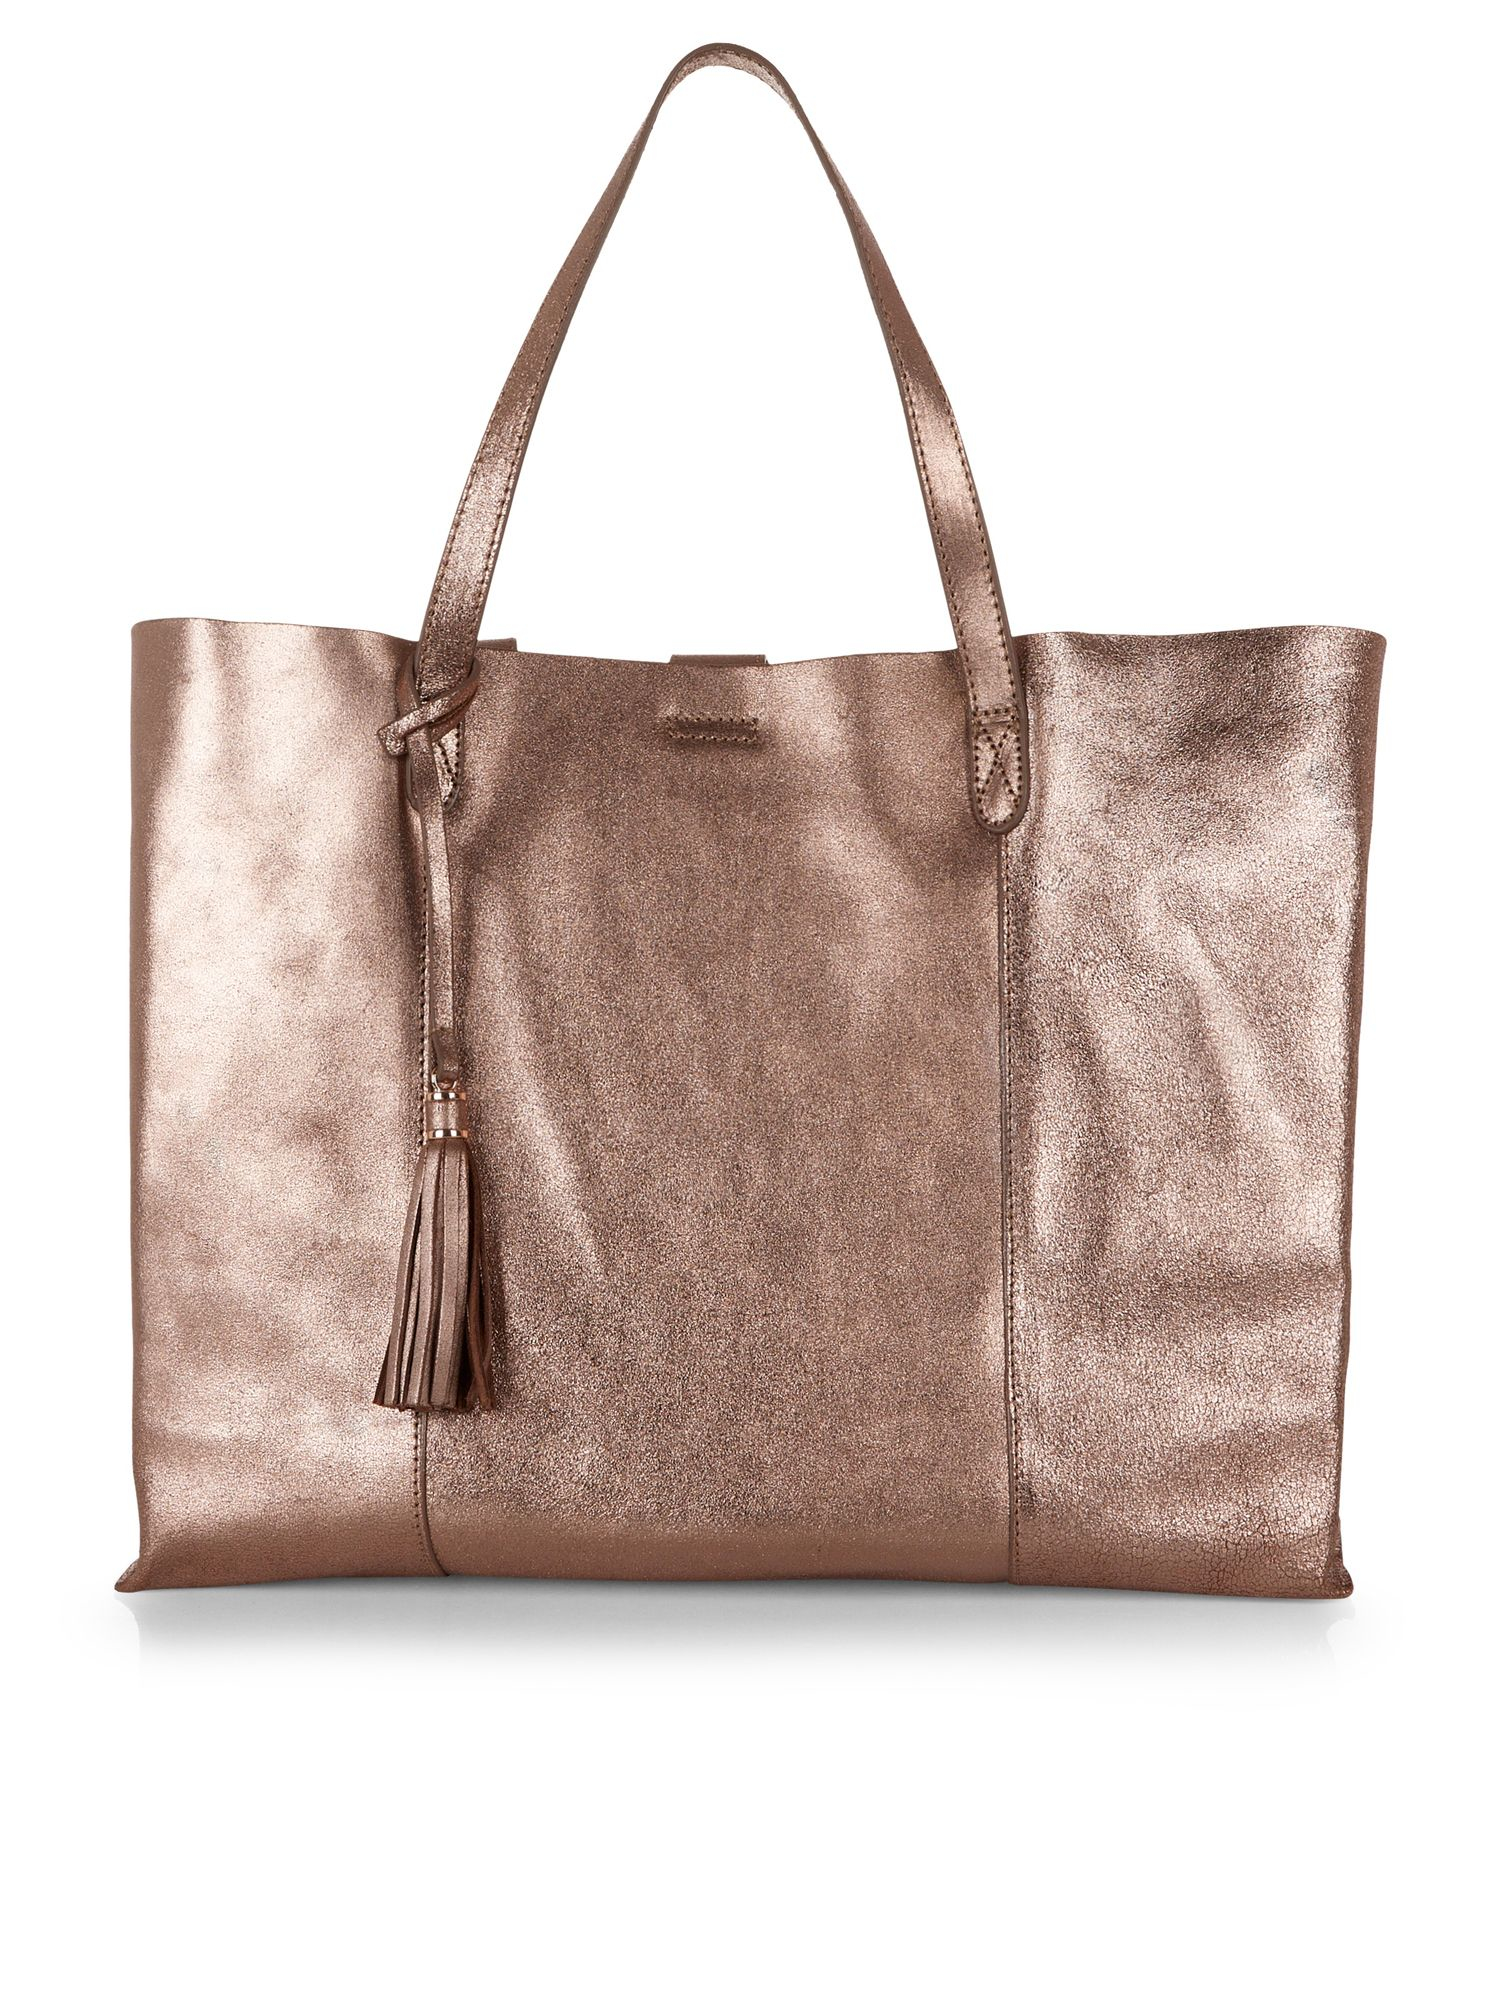 Accessorize Leather Slouchy Shopper Bag in Metallic (Brown) - Lyst